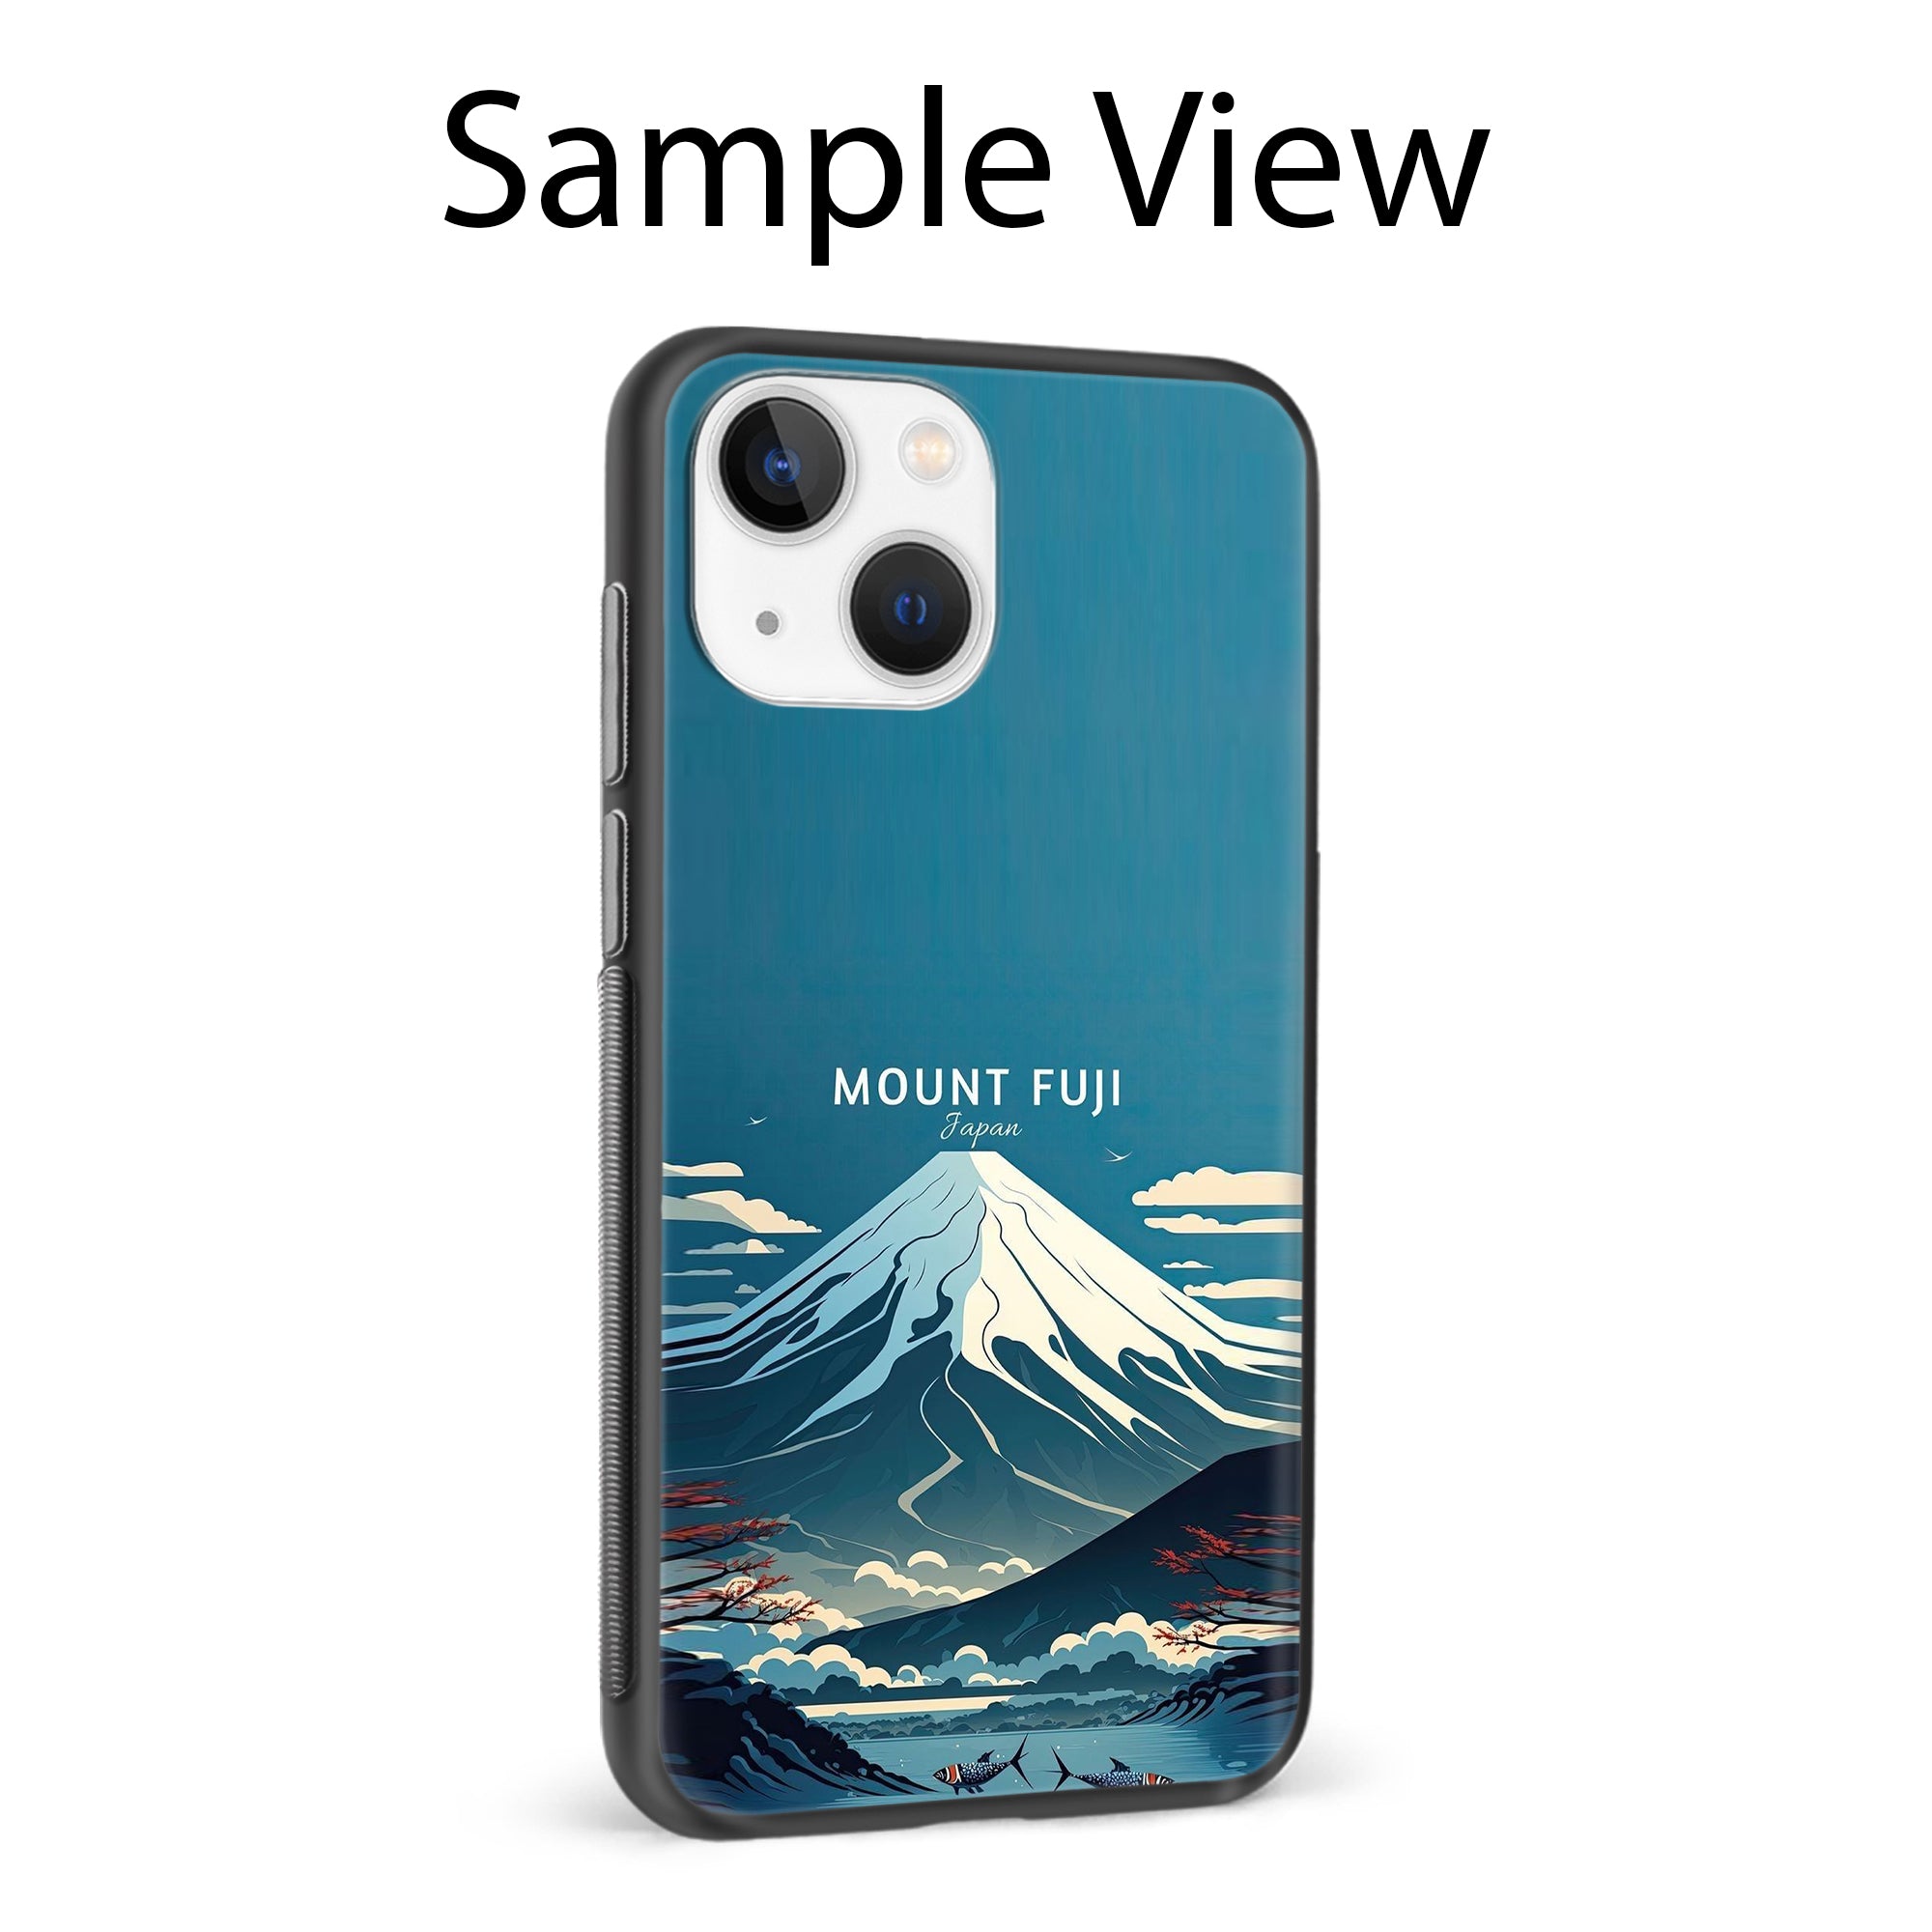 Buy Mount Fuji Metal-Silicon Back Mobile Phone Case/Cover For Oneplus 9R / 8T Online